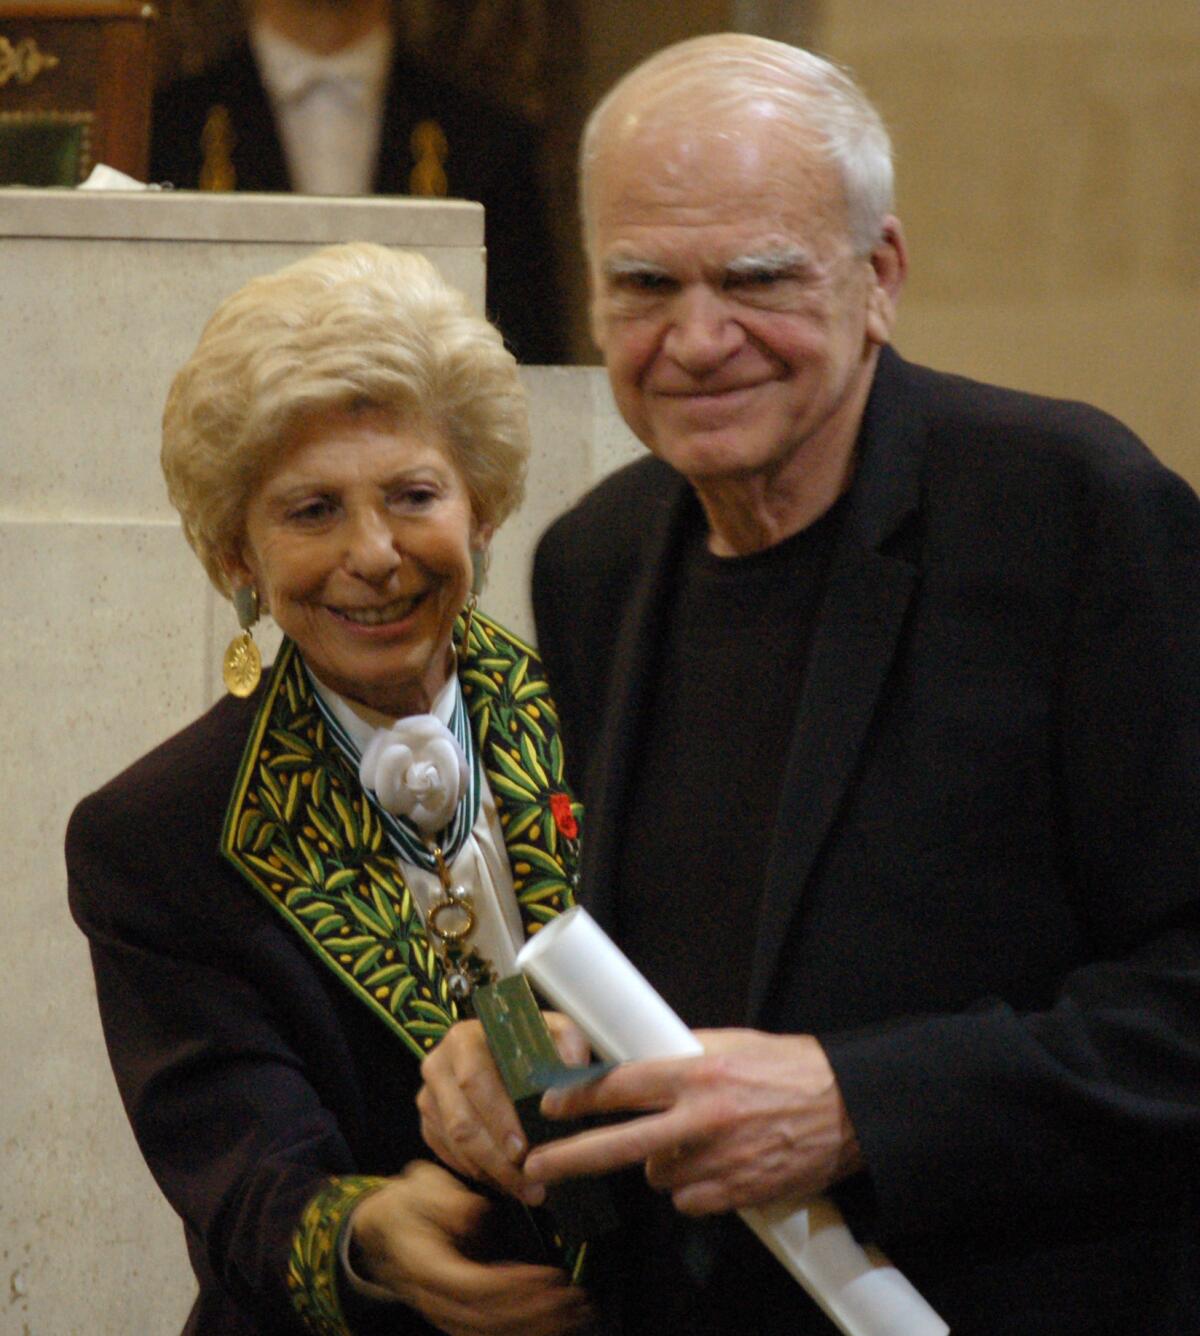 FILE - In this June 10, 2009, file photo, Czech-born author living in France Milan Kundera, right, is awarded the Simone and Cino Del Duca Foundation World Prize for his lifetime achievement in Paris, France. On the left is French political historian Helene Carrere d'Encausse. Kundera has regained Czech citizenship after 40 years, daily Pravo writes on Tuesday, Dec. 3, 2019, adding that Czech ambassador Petr Drulak handed the relevant document to him in his Paris apartment on November 28. (Remy Vlachos/CTK via AP)